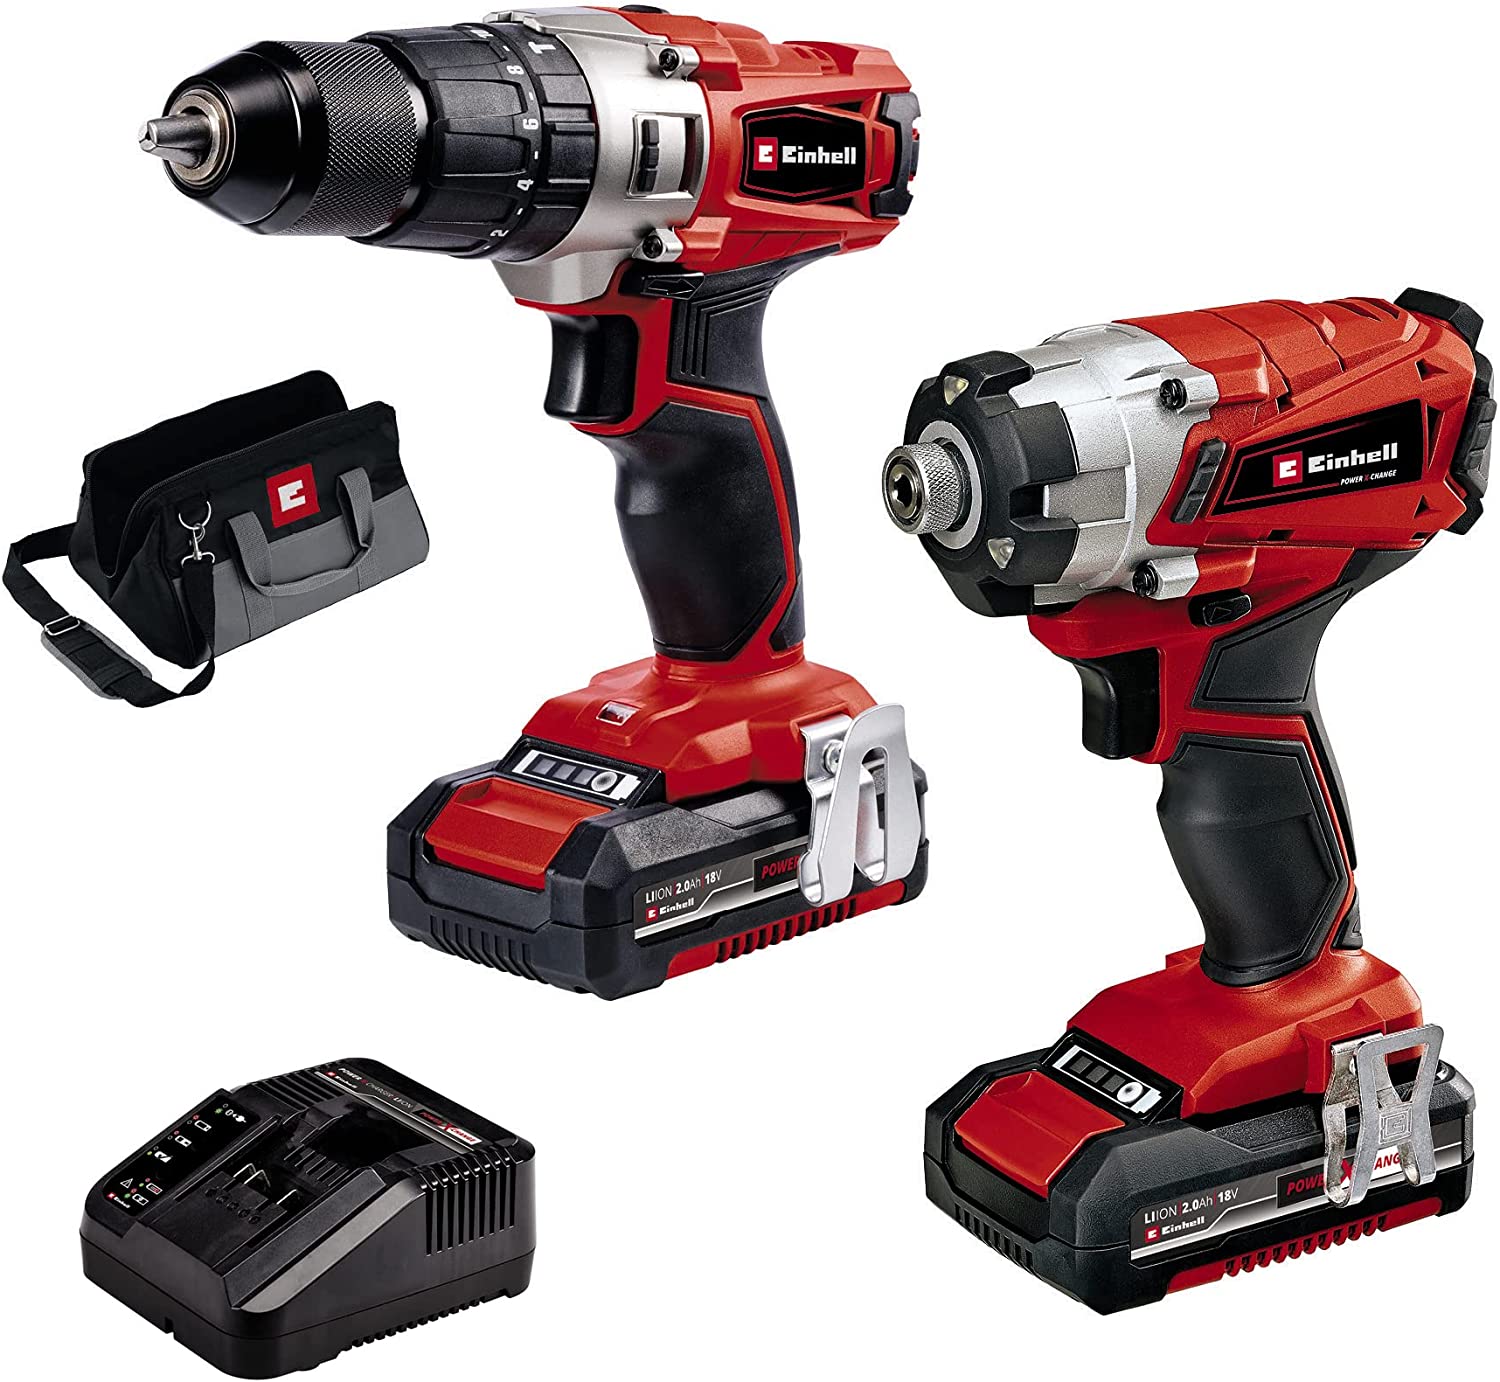 Einhell Power X-Change 18V Cordless Drill And Impact Driver Set With 2 x Batteries, Charger And Storage Bag